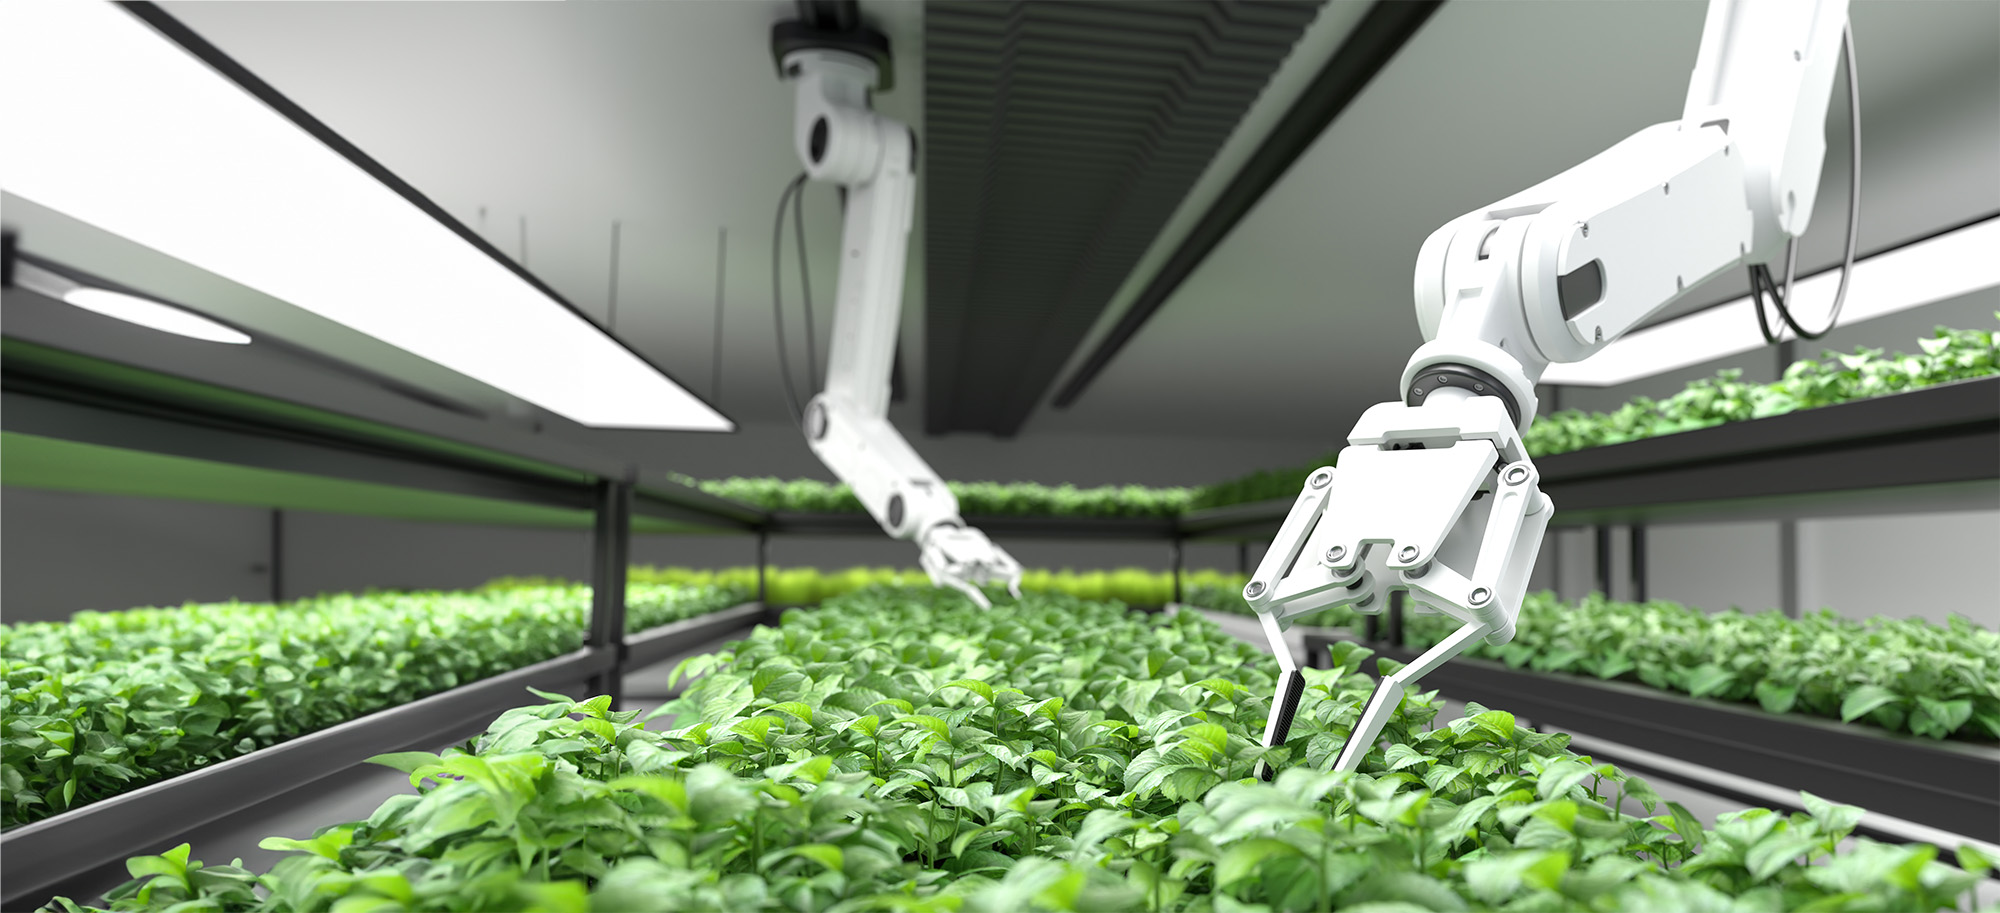 Featured image for “Smart Future Farms – Indoor Vertical Farming”